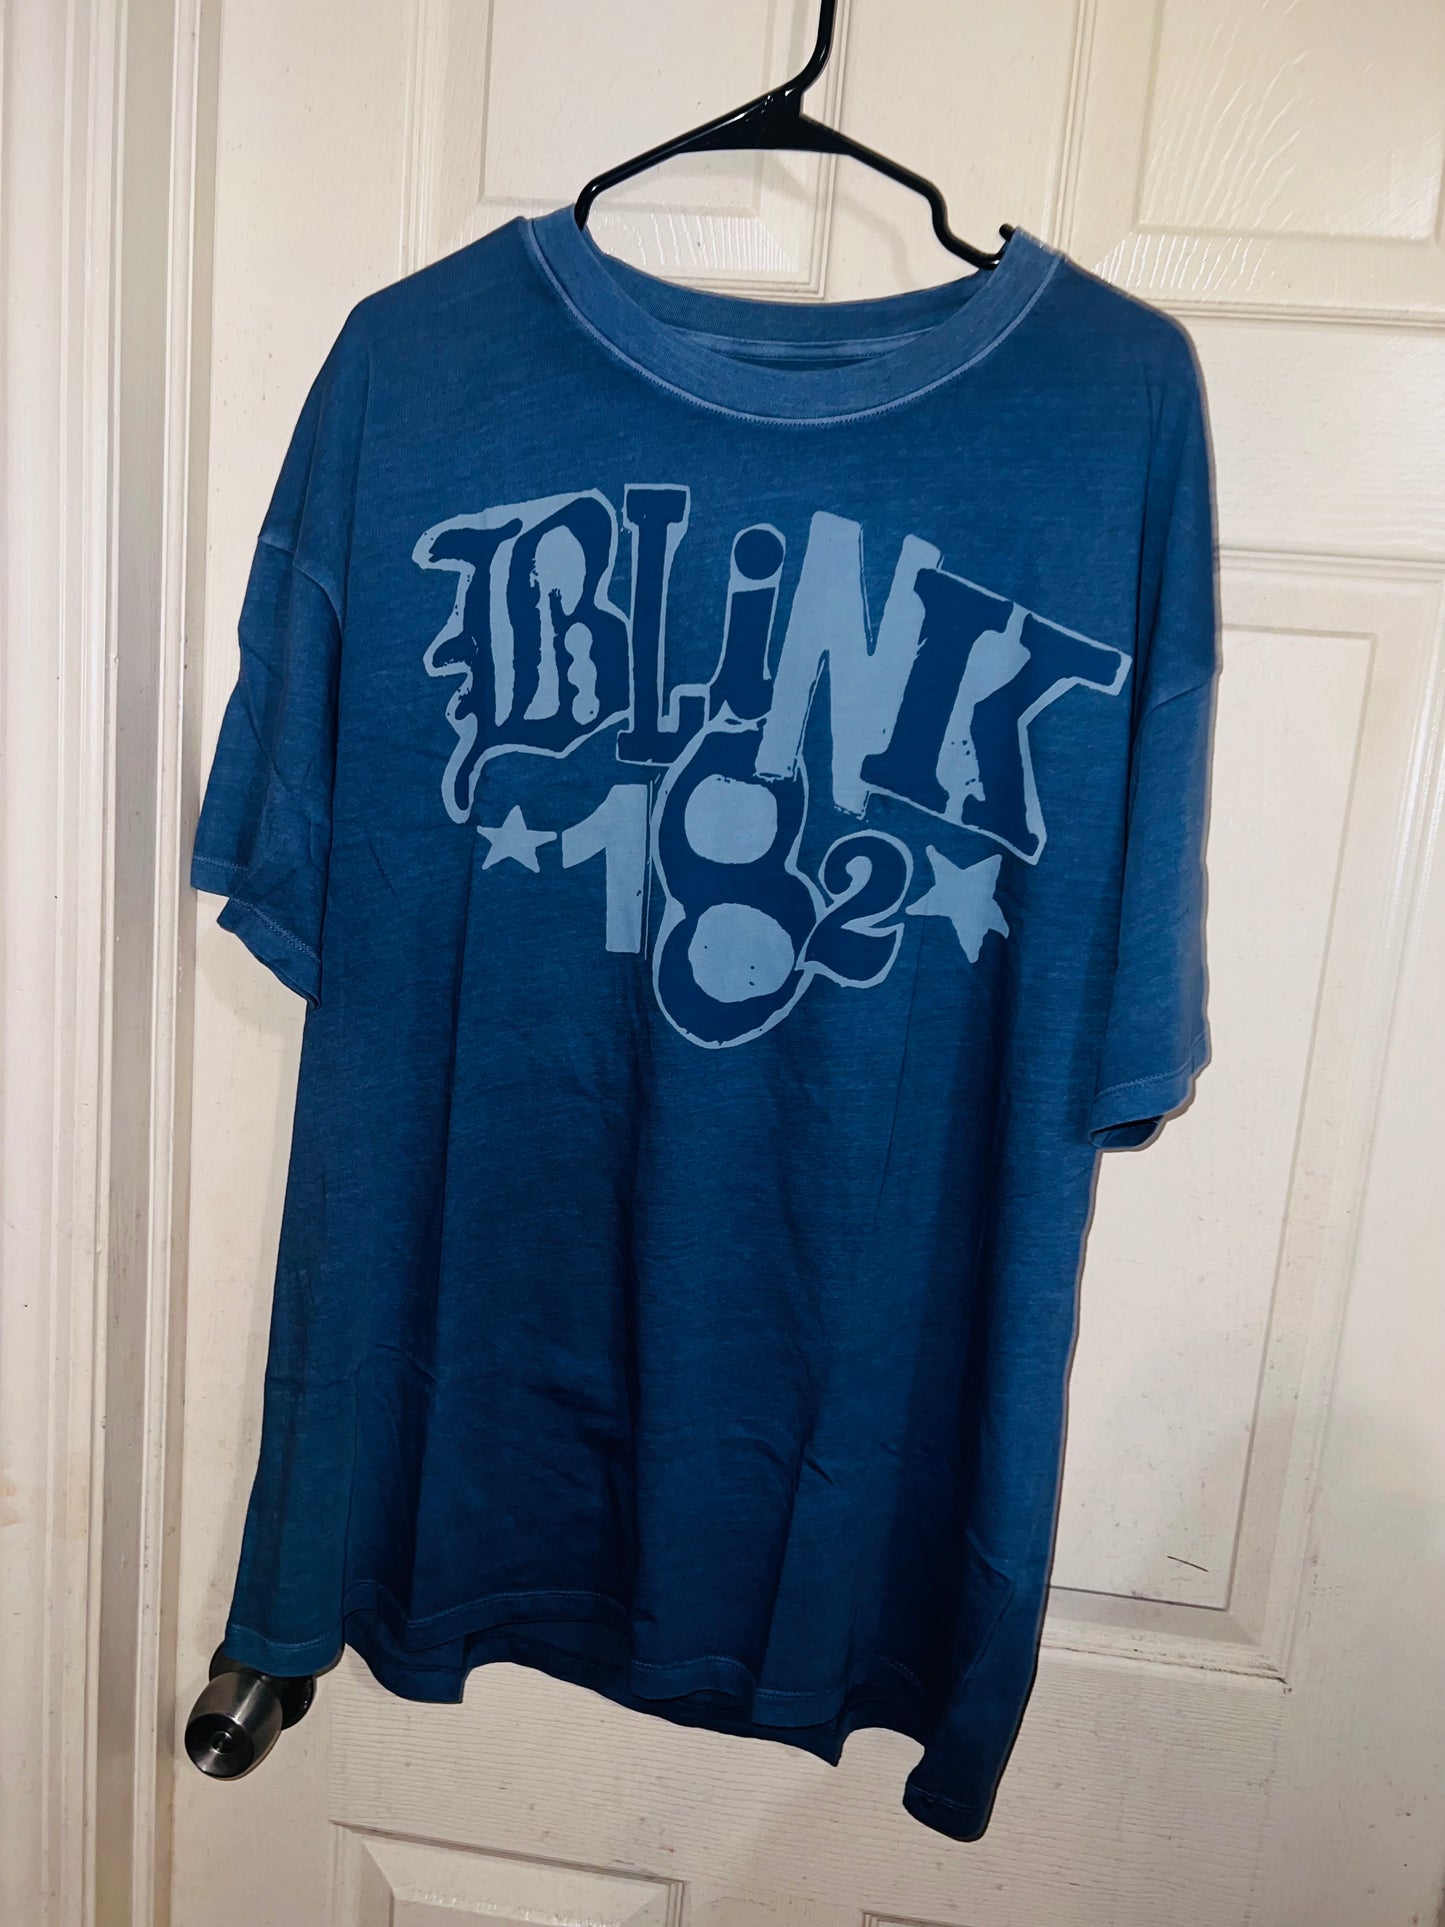 Blink 182 Oversized Distressed Tee